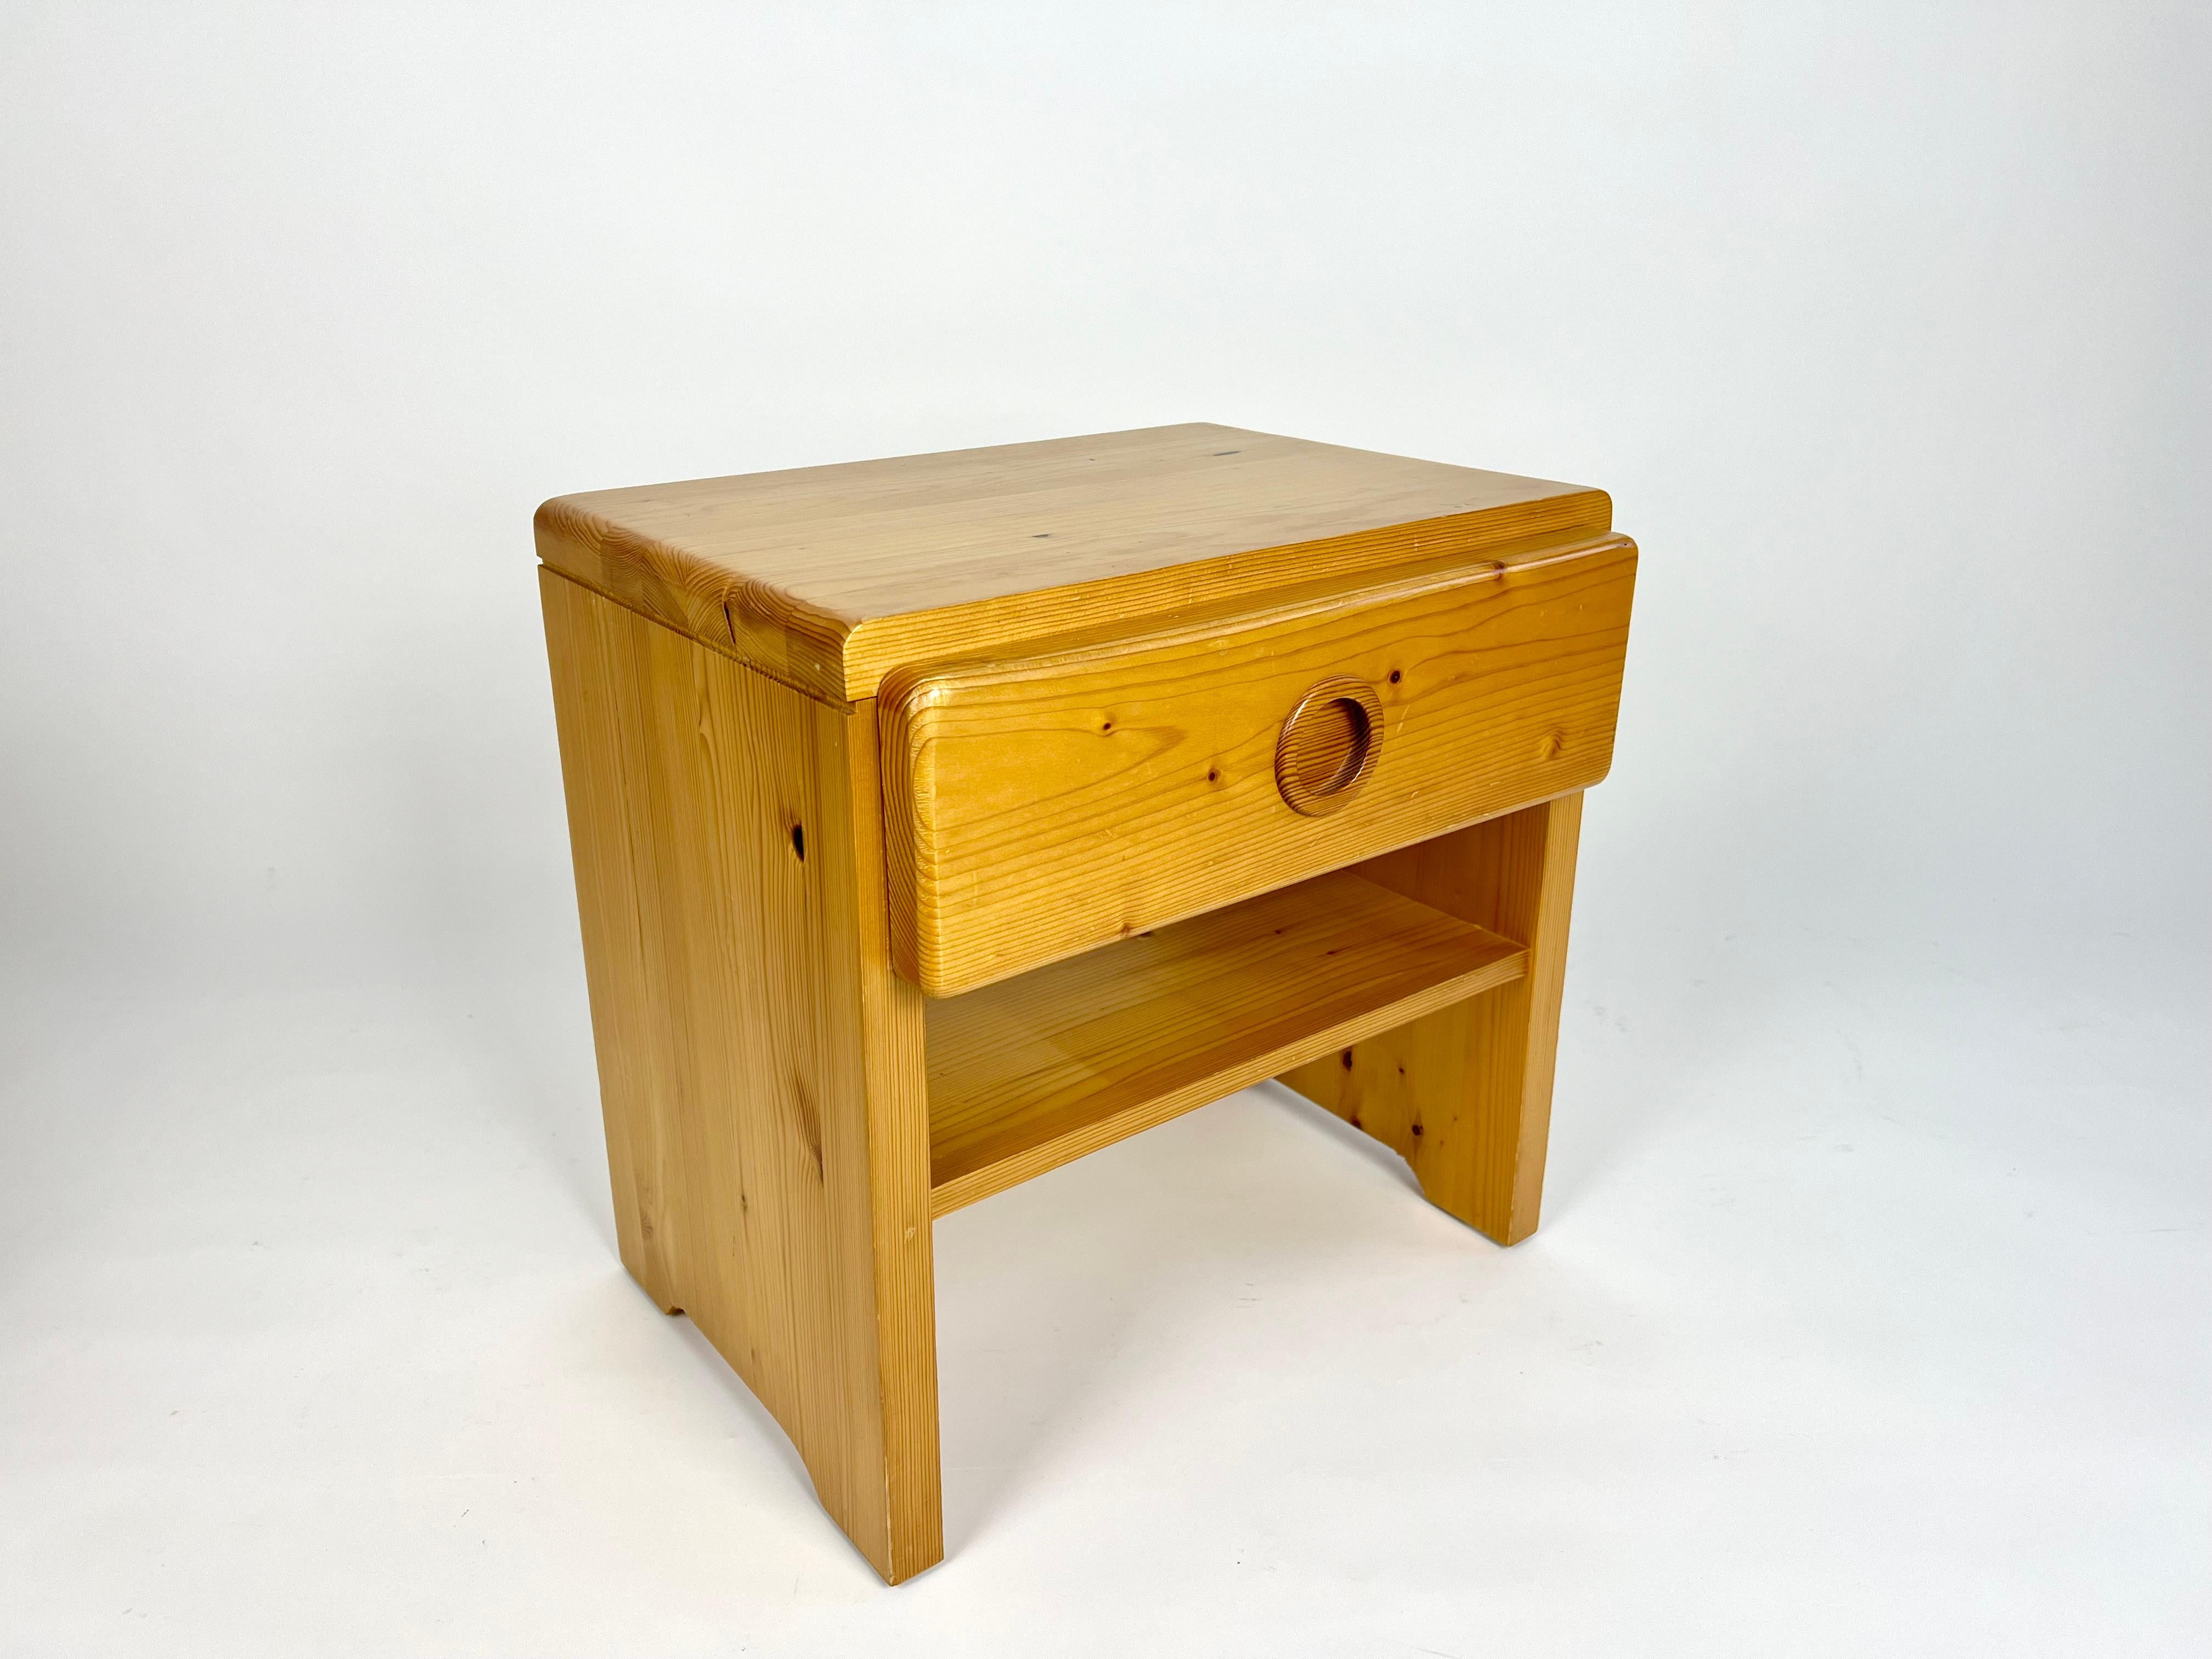 Charlotte Perriand pine bed side tables / night stand.

Sourced from an apartment clearance in the alpine resort of Arc 1600, France.

Very good vintage condition, great colour to the pine. No damage, minor signs of age and use as pictured, only